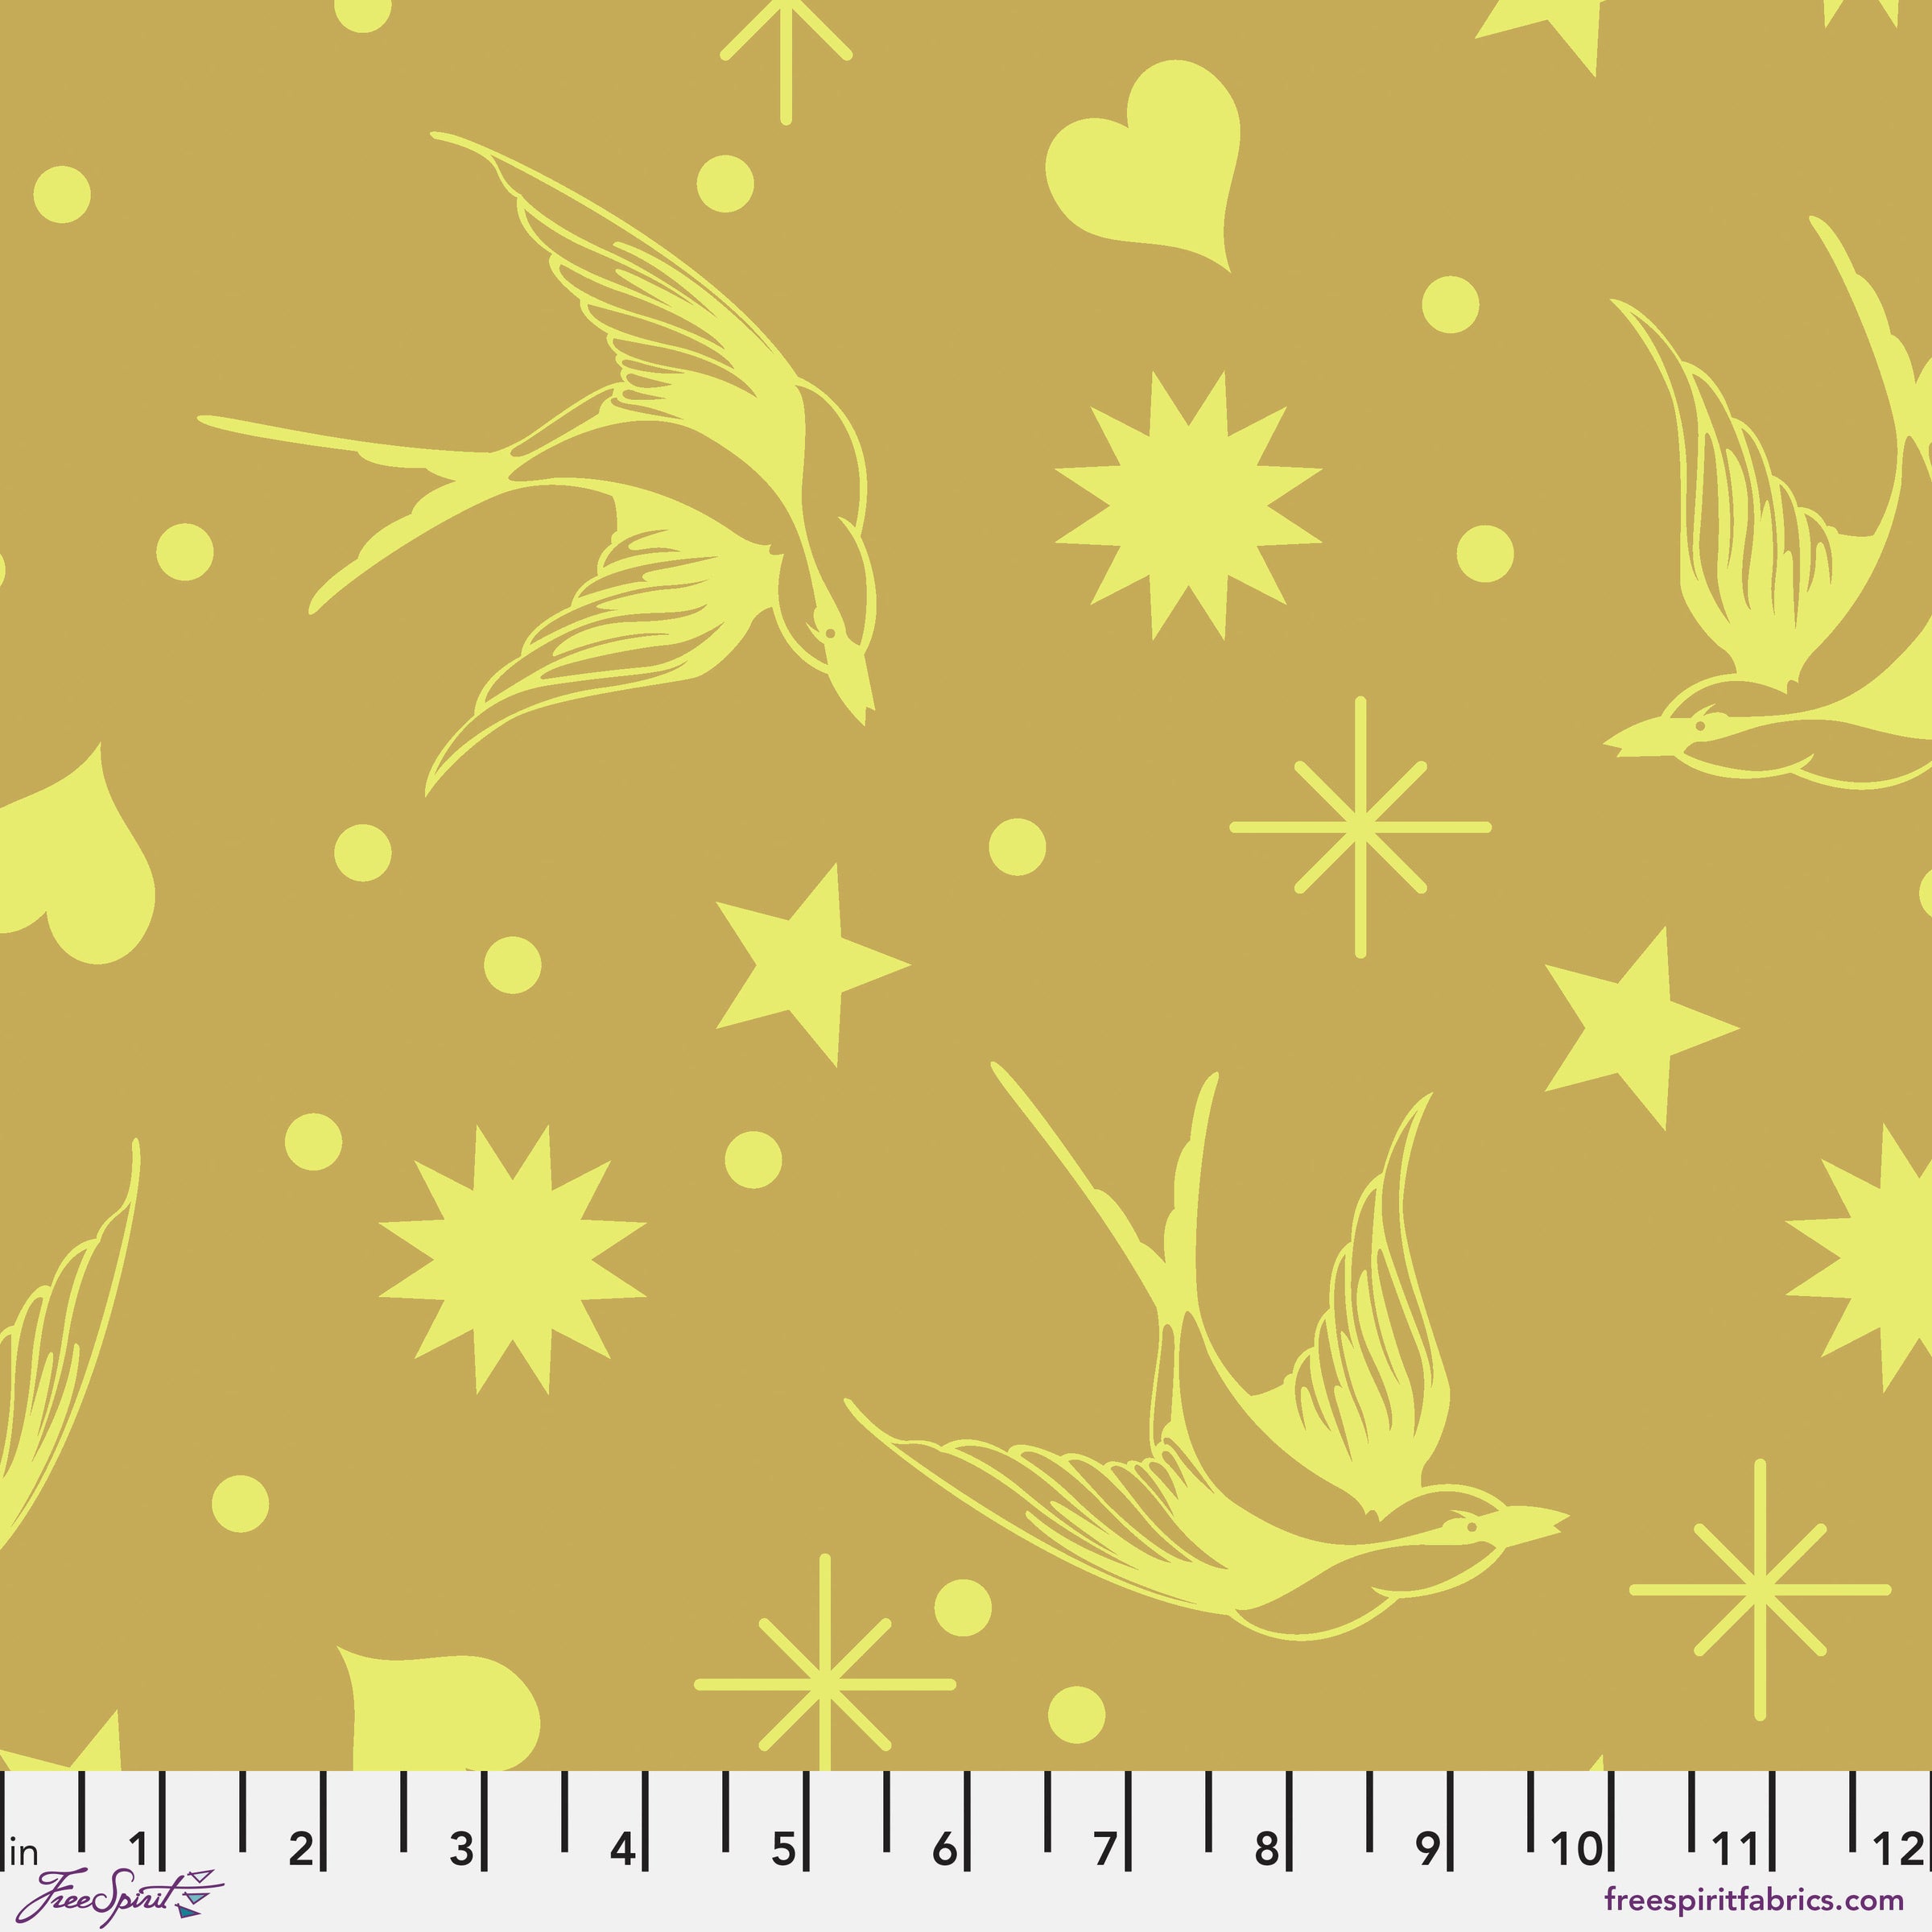 Everglow Quilt Fabric by Tula Pink - Neon Fairy Flakes in Moon Beam Yellow Gold - PWTP157.MOONBEAM